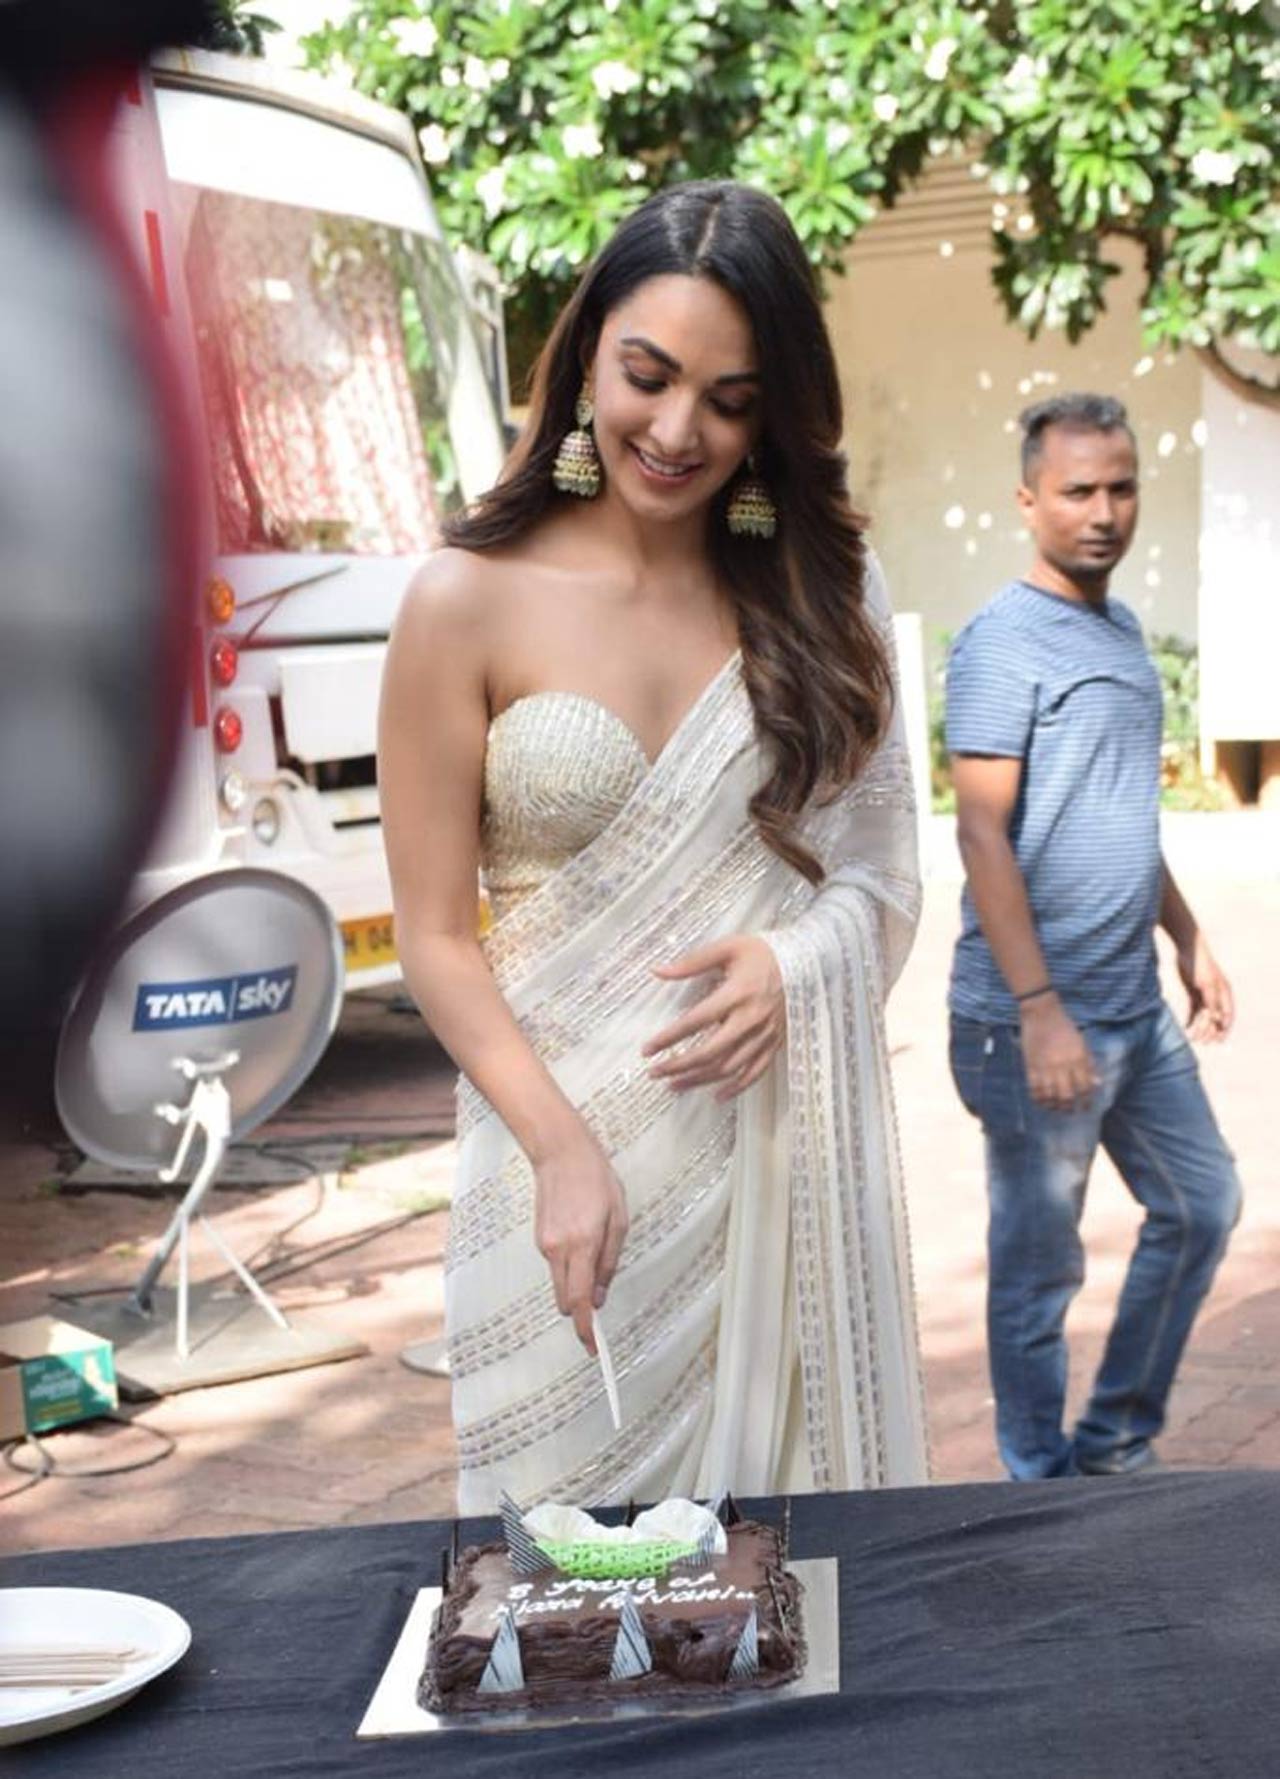 Fans celebrated Kiara Advani's eight years in Bollywood by beginning the interaction with the Nach Punjabban hook step challenge from her upcoming film, 'Juggjugg Jeeyo'